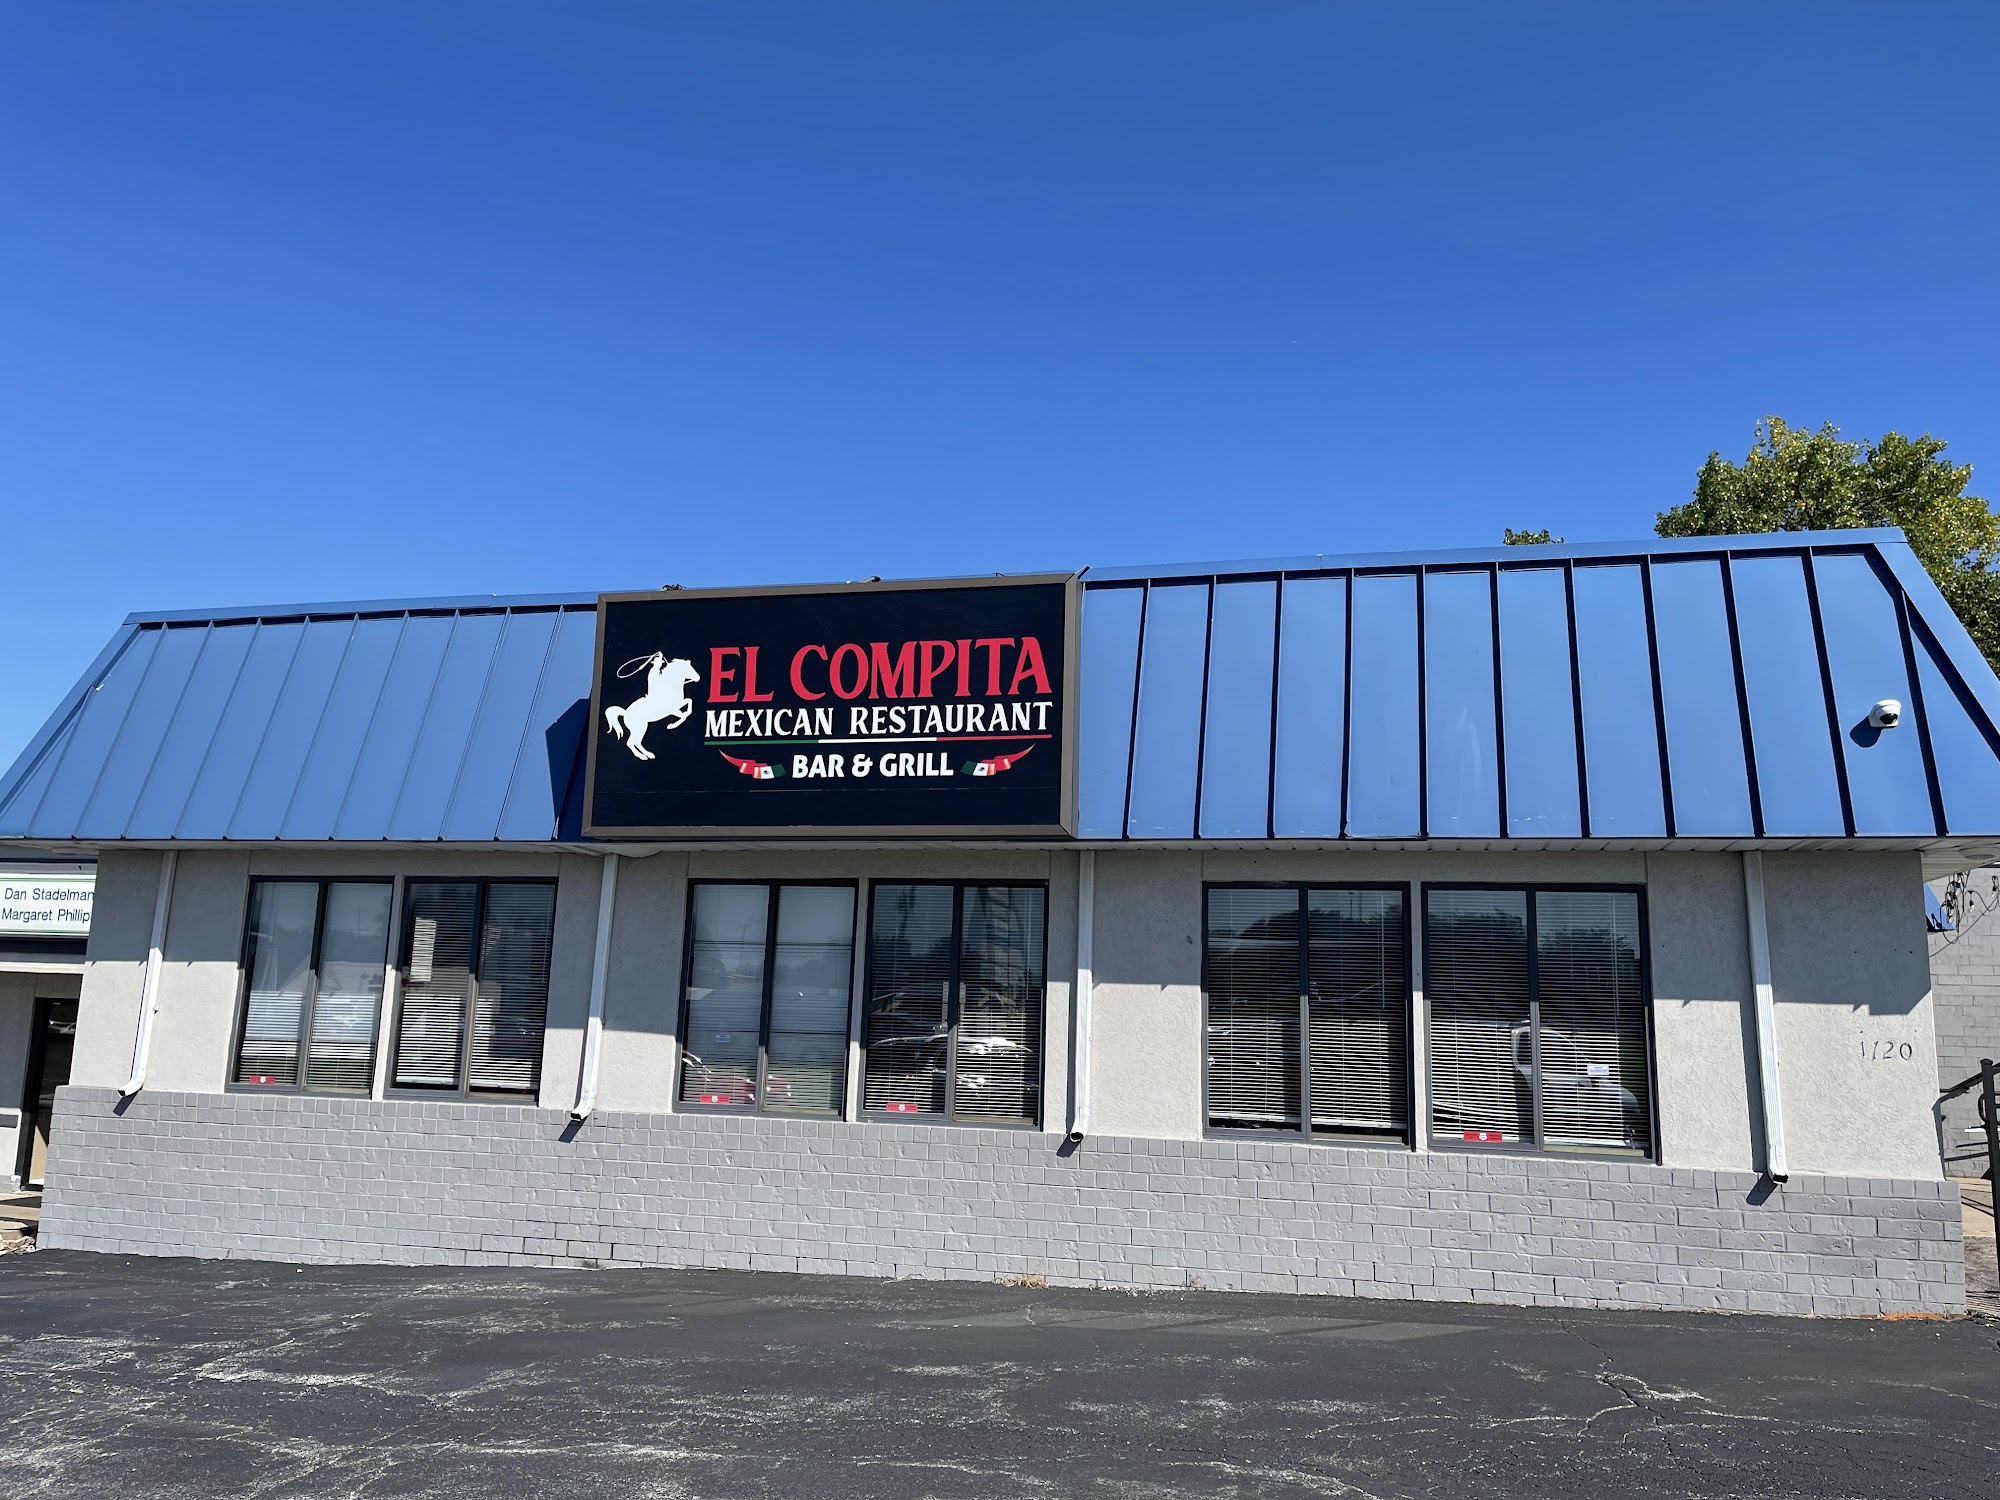 El Compita Mexican Restaurant Bar And Grill In Kimberly